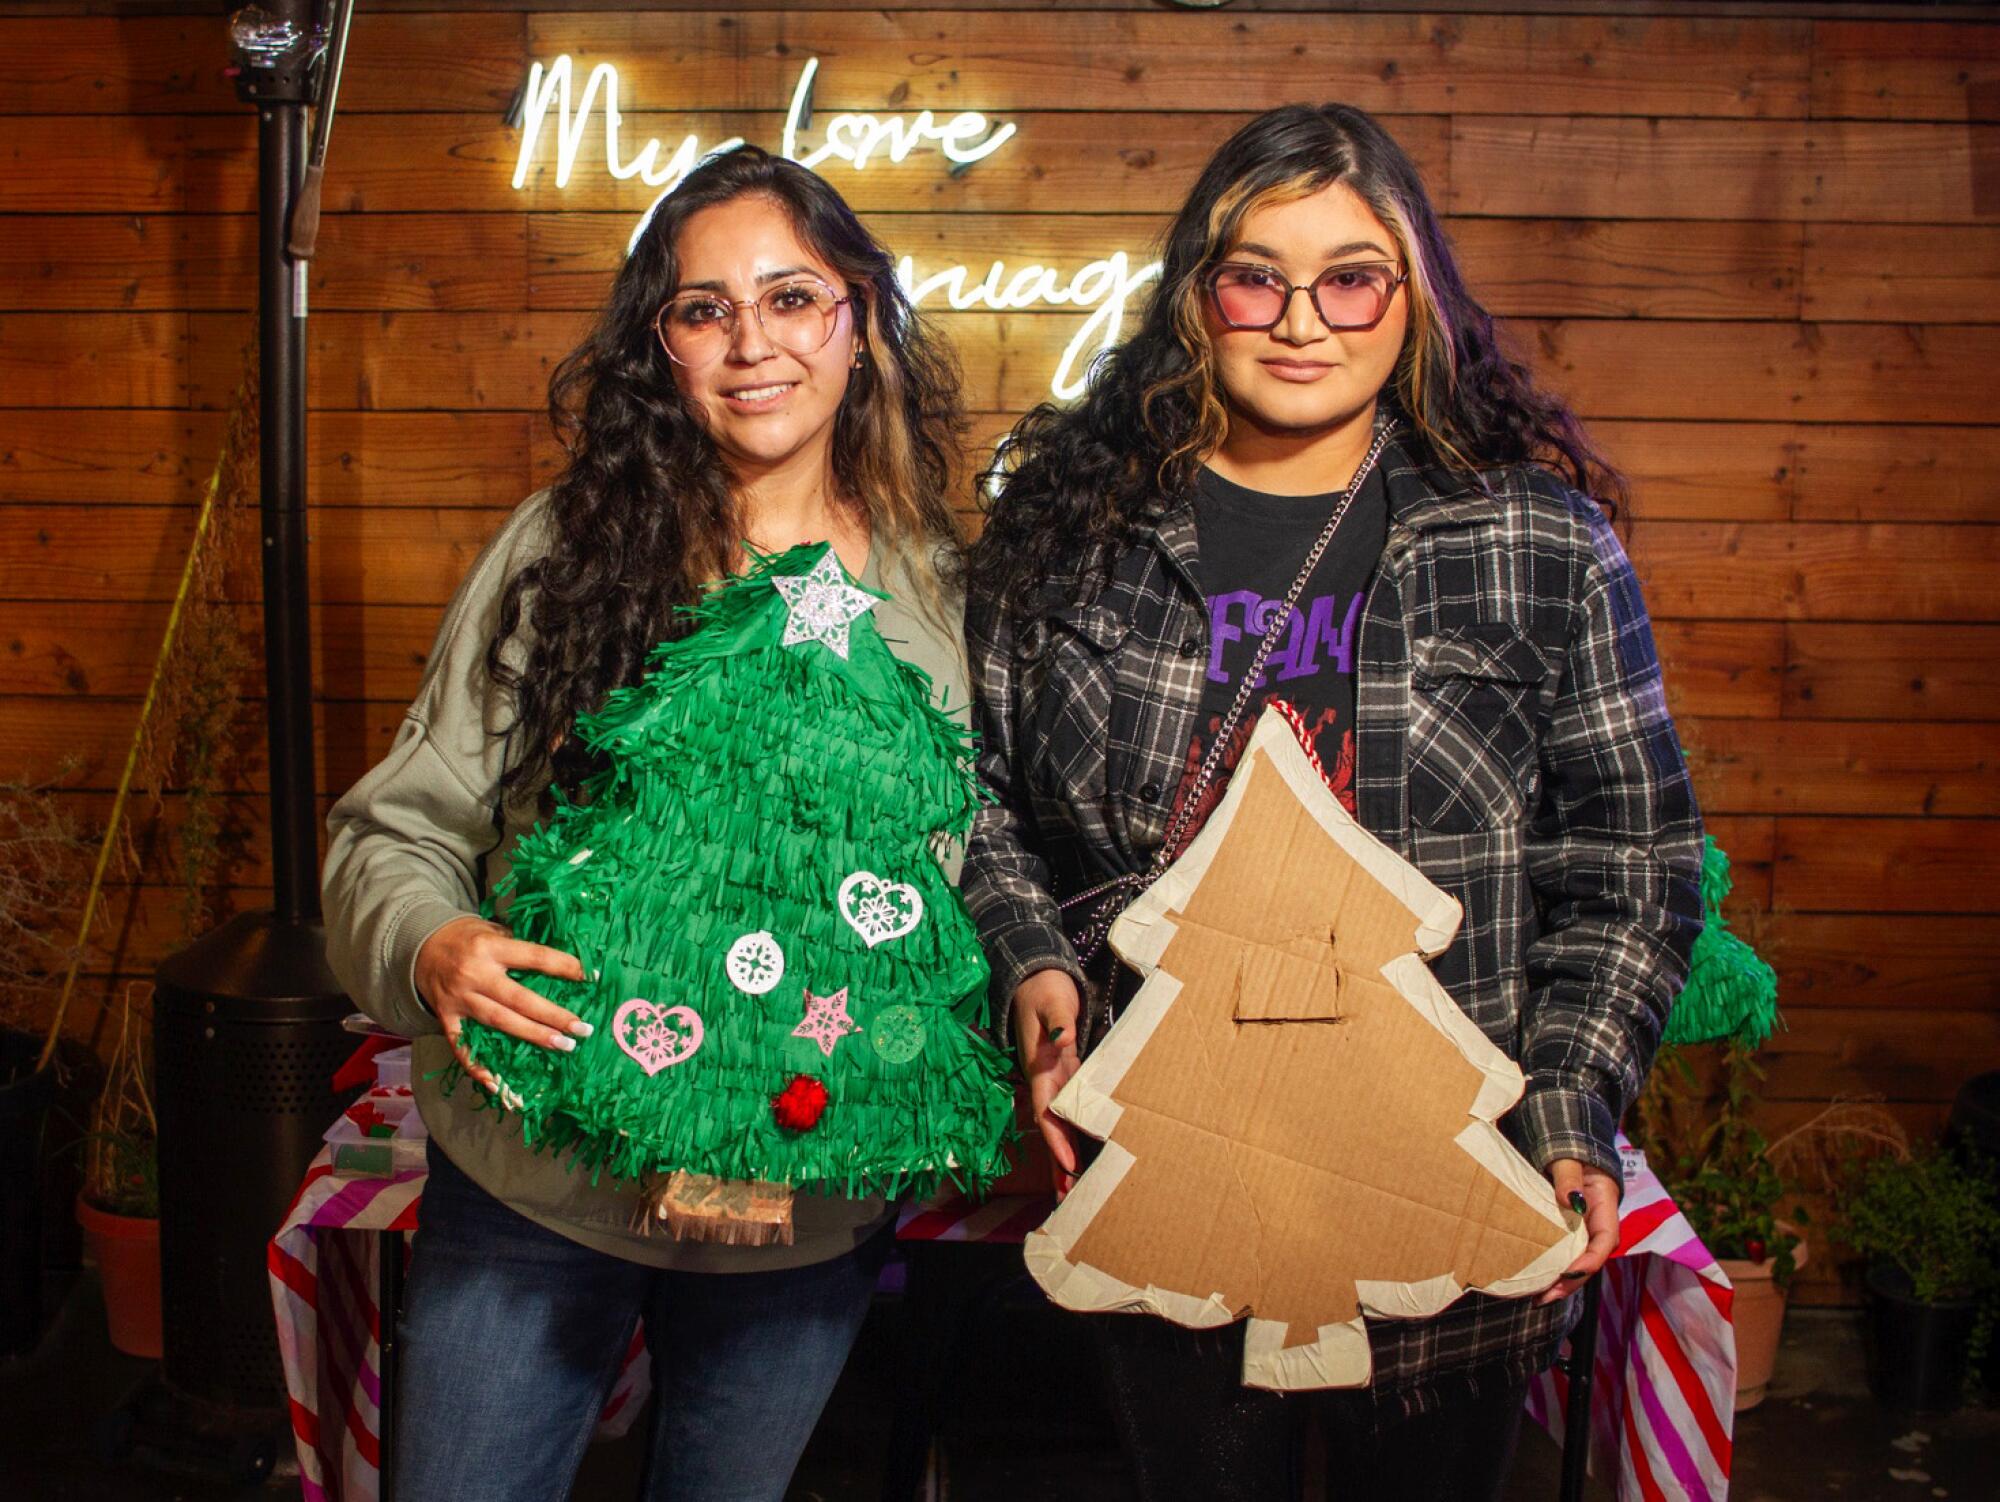 Decorate a Christmas tree piñata at this weekend's workshop by Party Girl Piñatas.